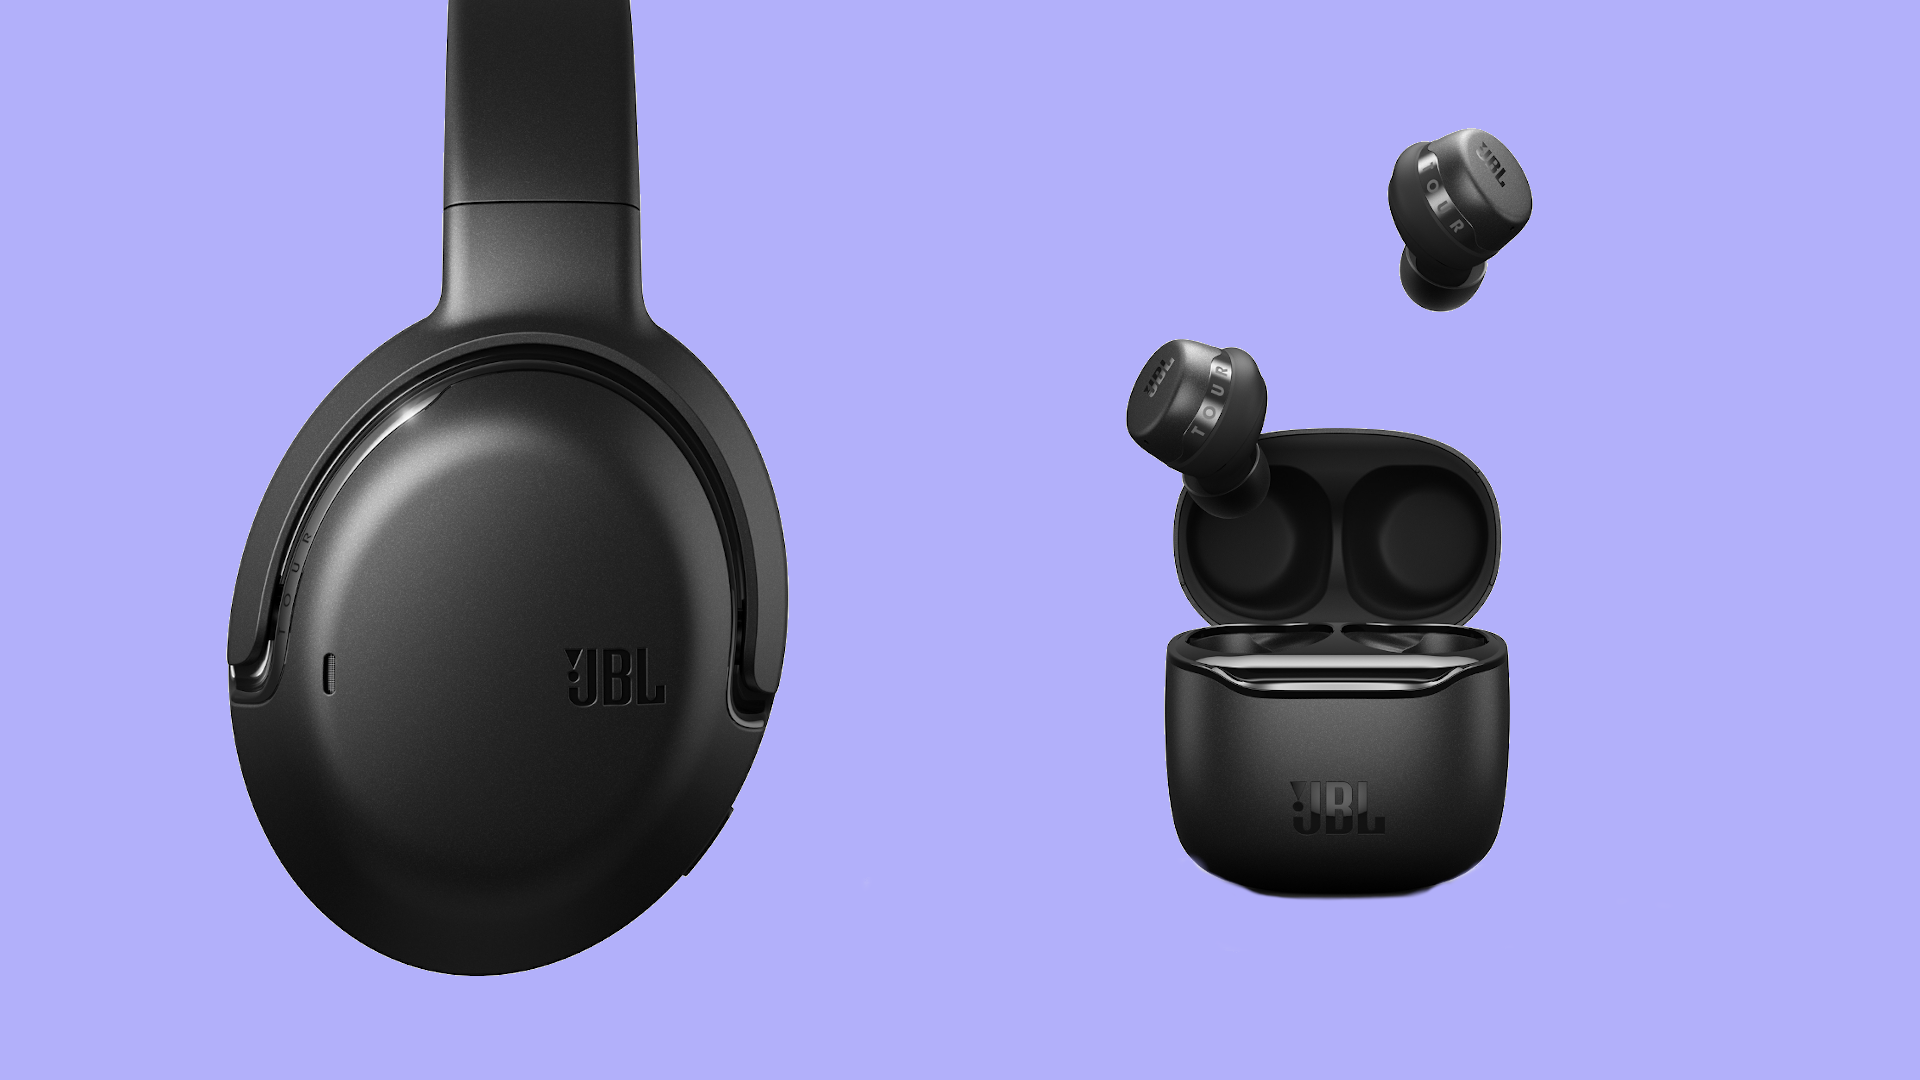 barndom Urskive lure JBL's new noise-cancelling headphones undercut AirPods Pro and AirPods Max  | Tom's Guide